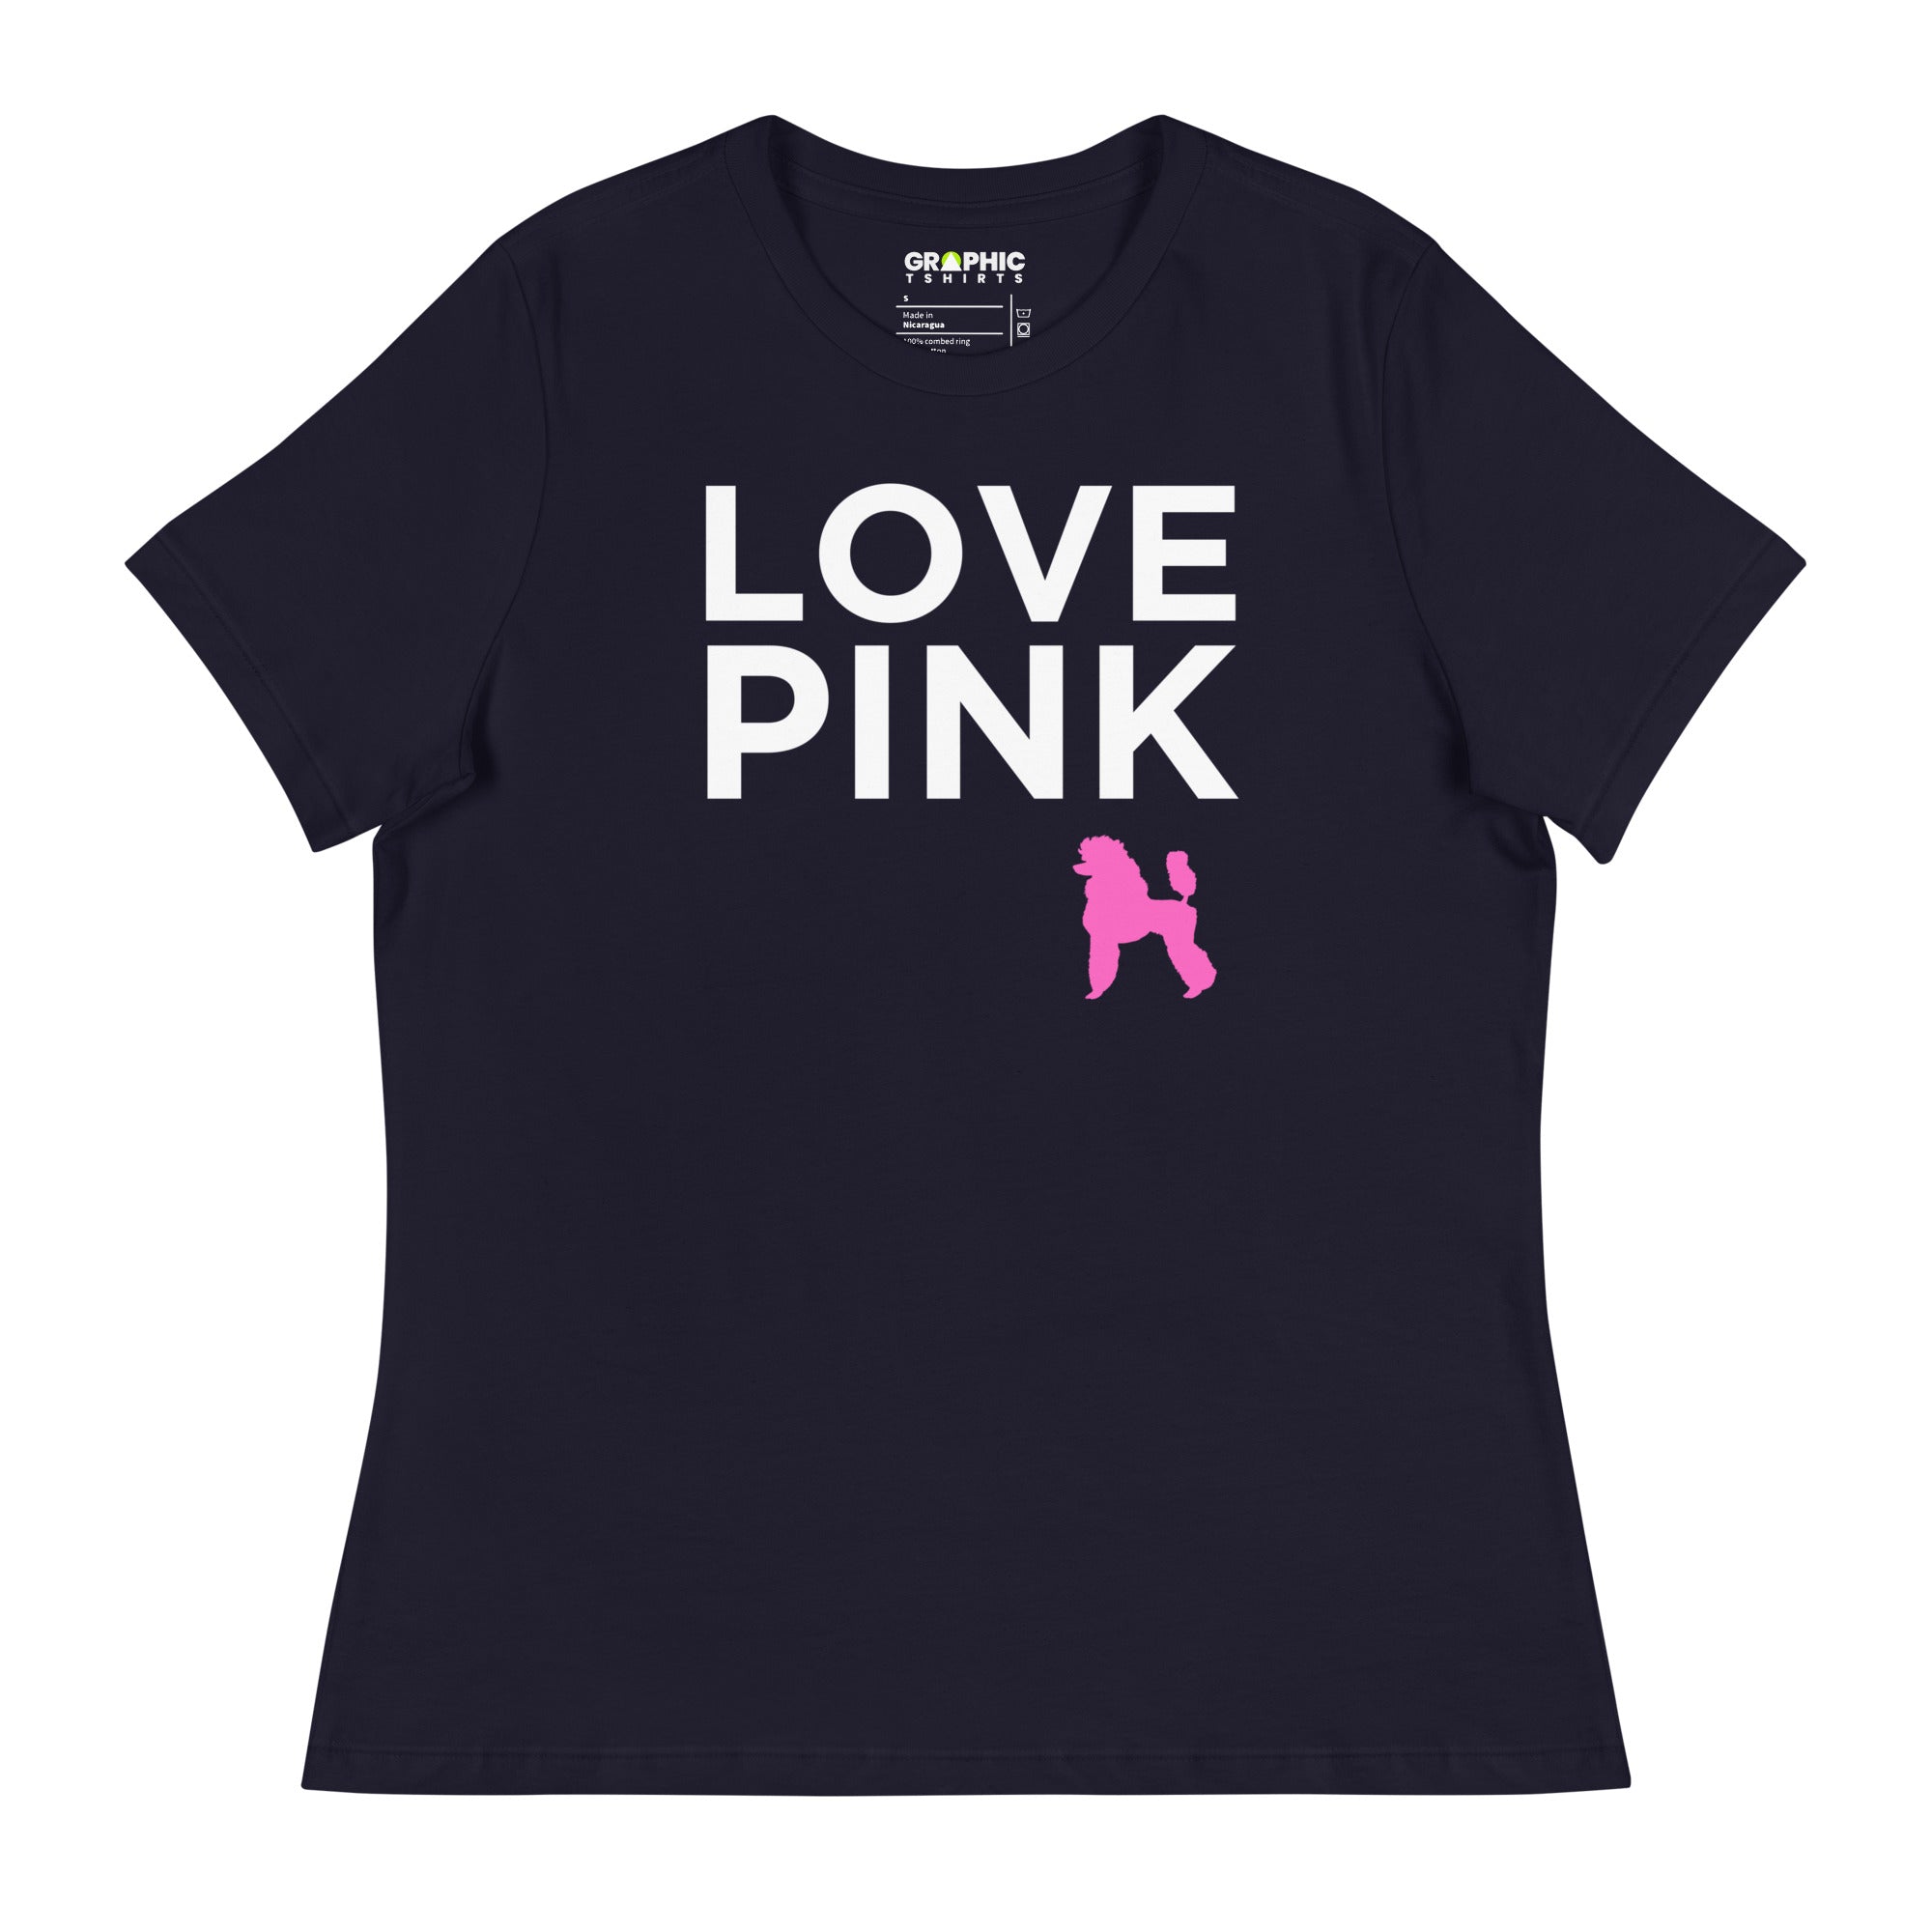 Women's Relaxed T-Shirt - Love Pink - GRAPHIC T-SHIRTS